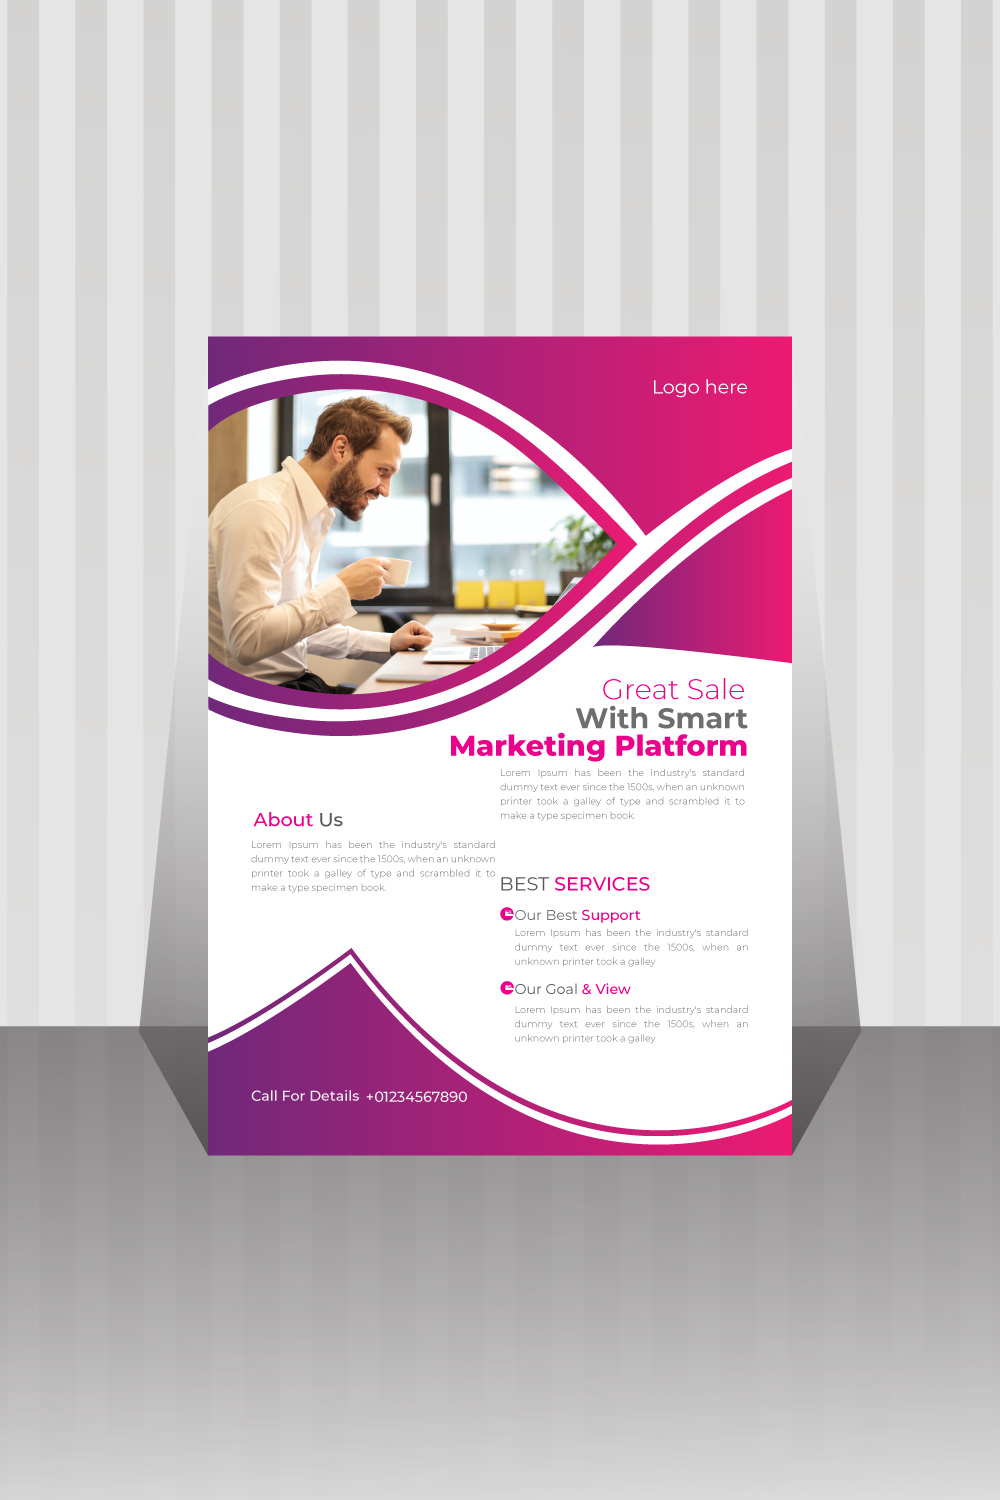 Image of a corporate business flyer with enchanting design